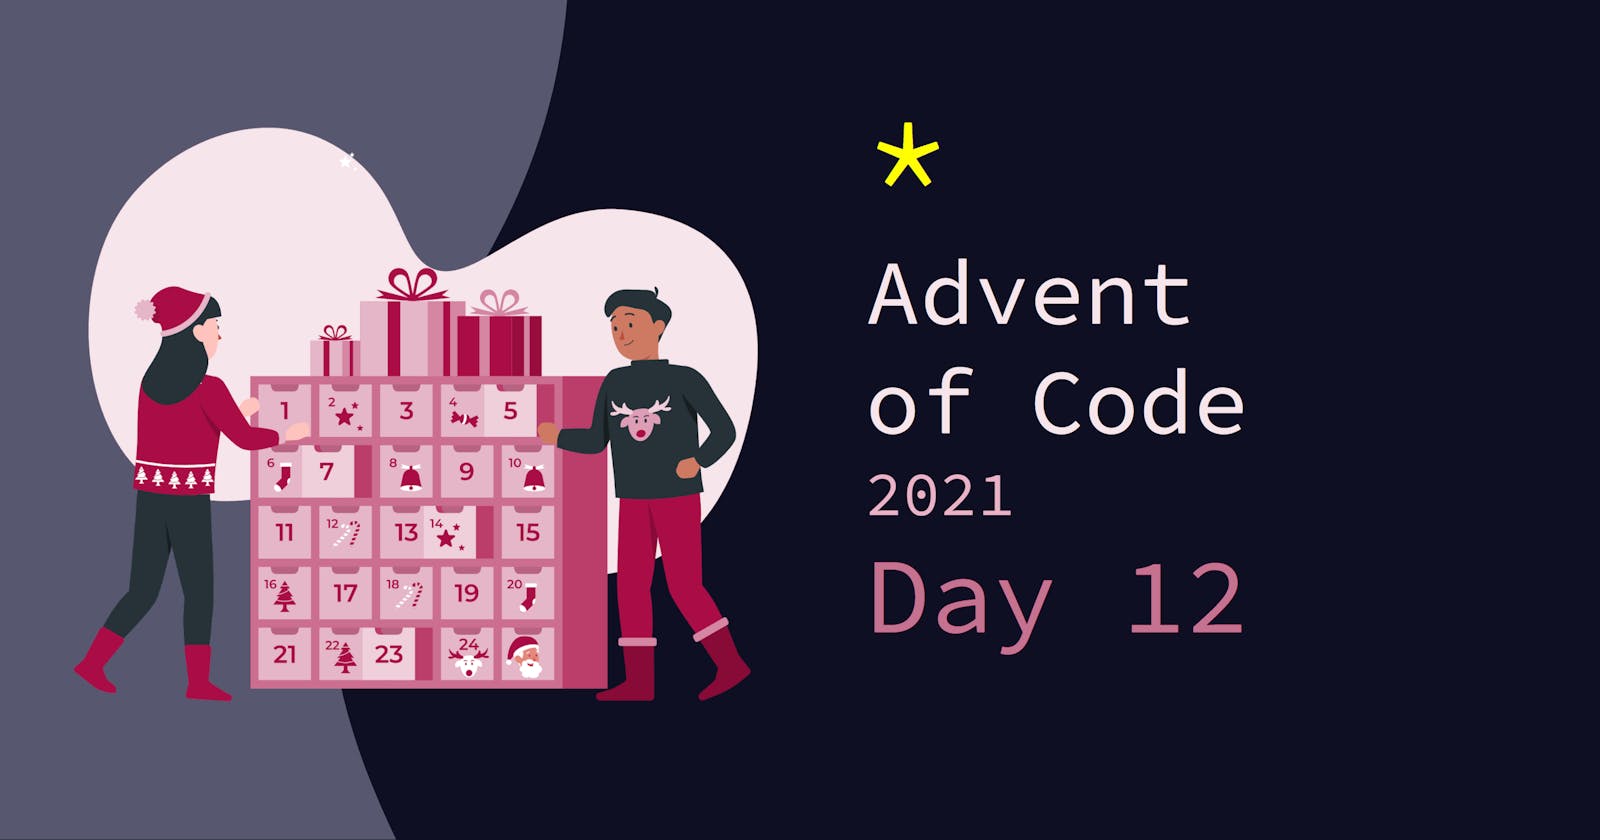 Advent of Code 2021: Day 12